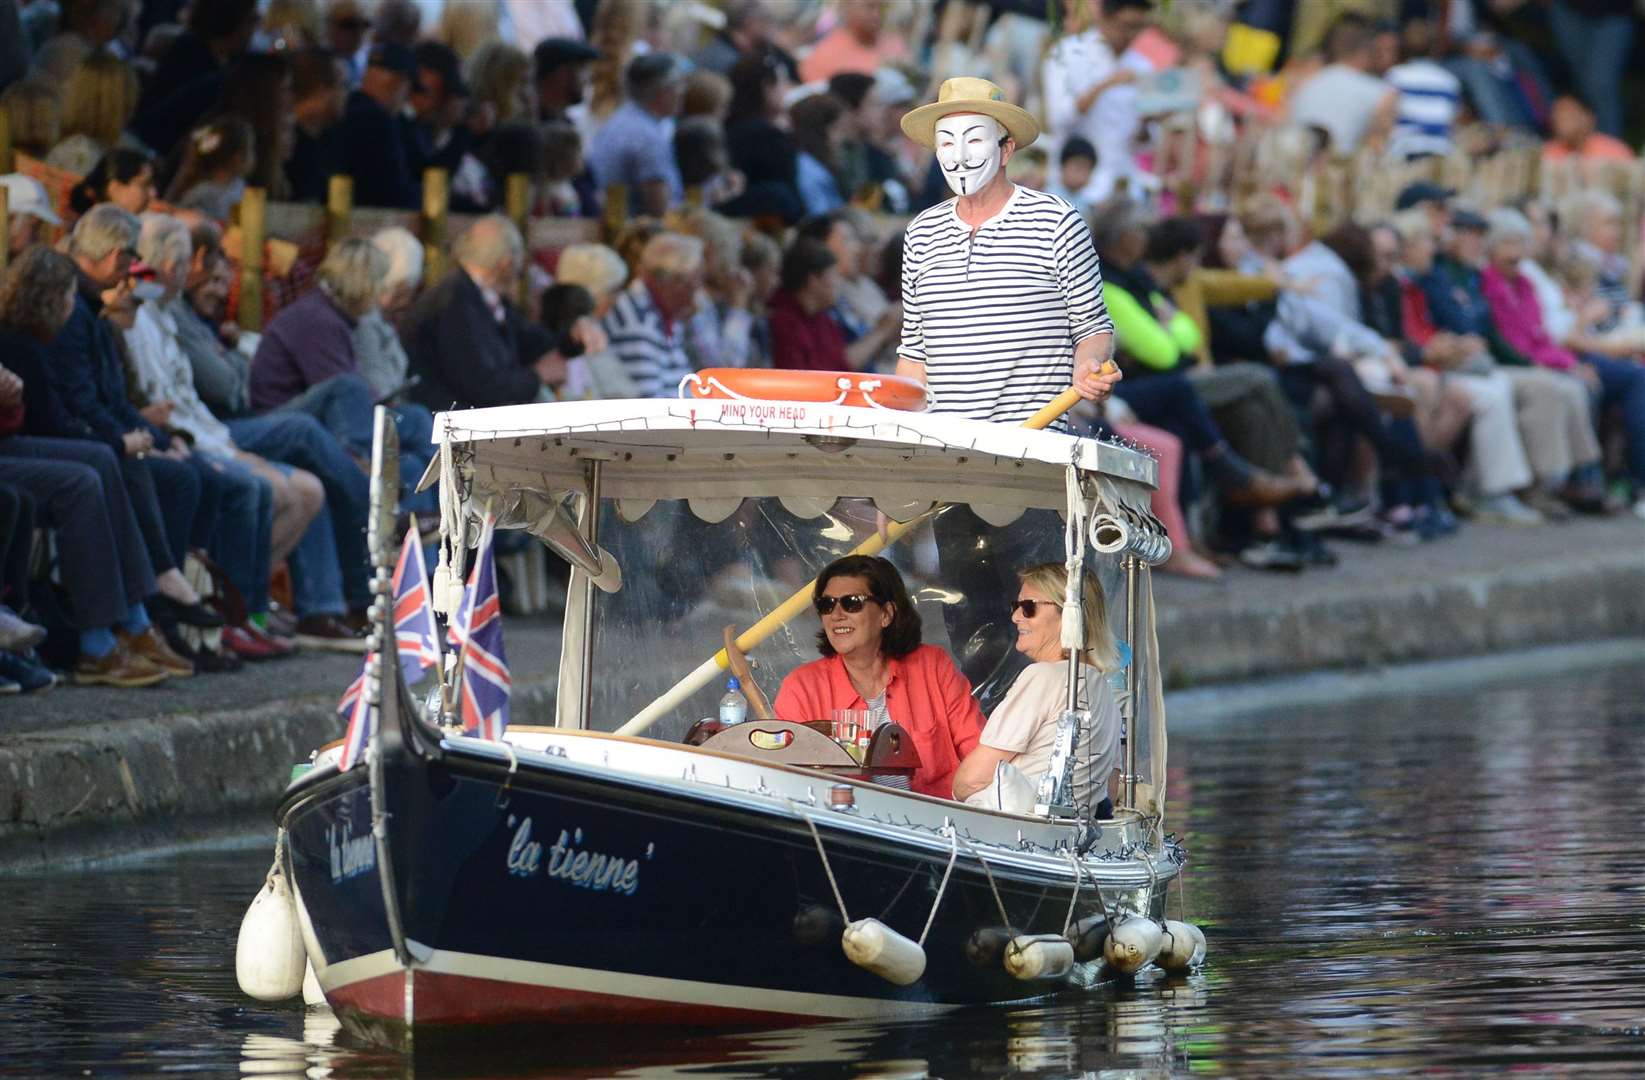 The Hythe Venetian Fete will be on the Royal Military Canal